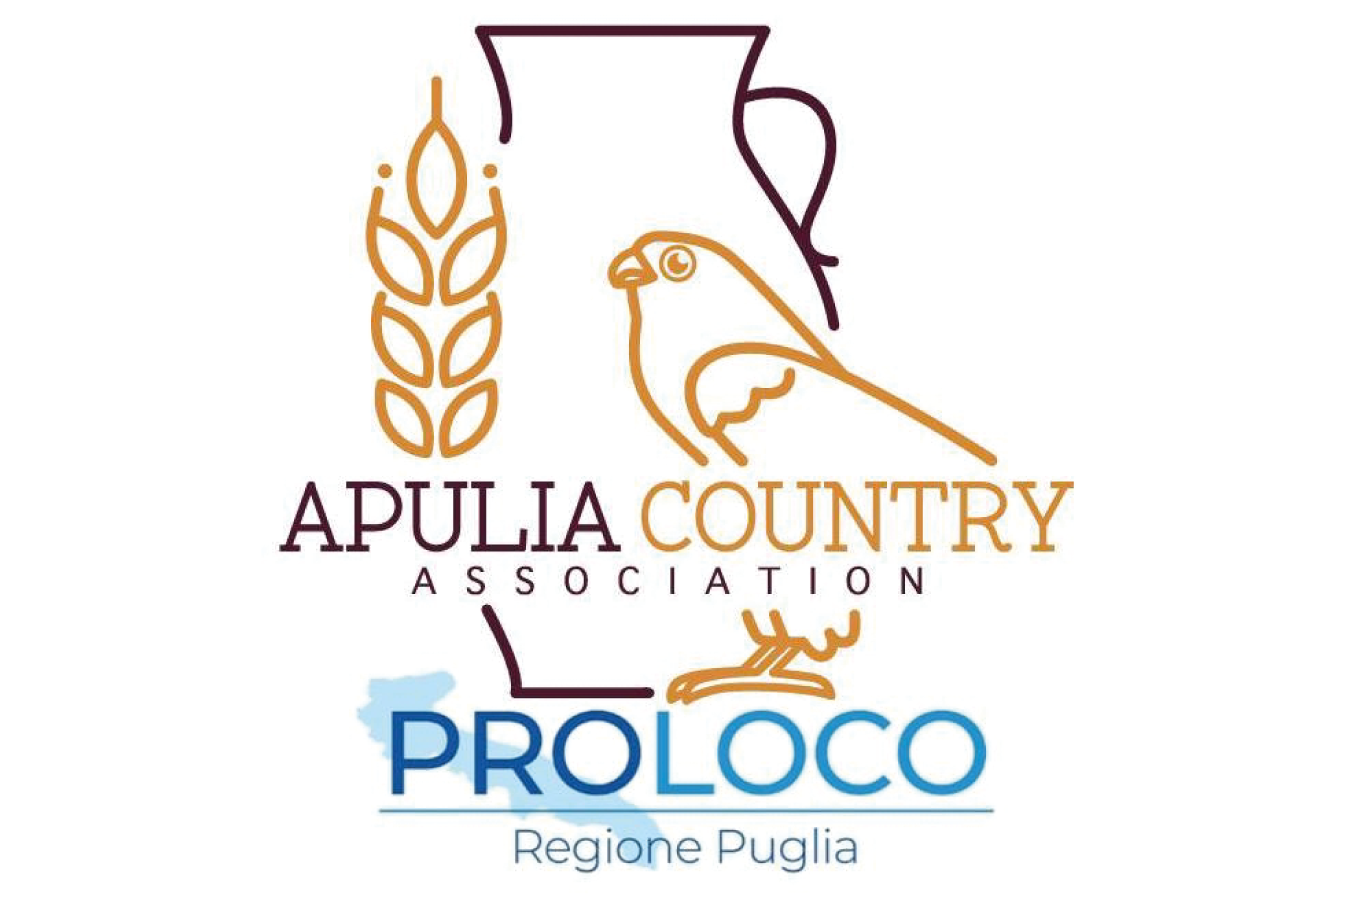 APULIA-COUNTRY